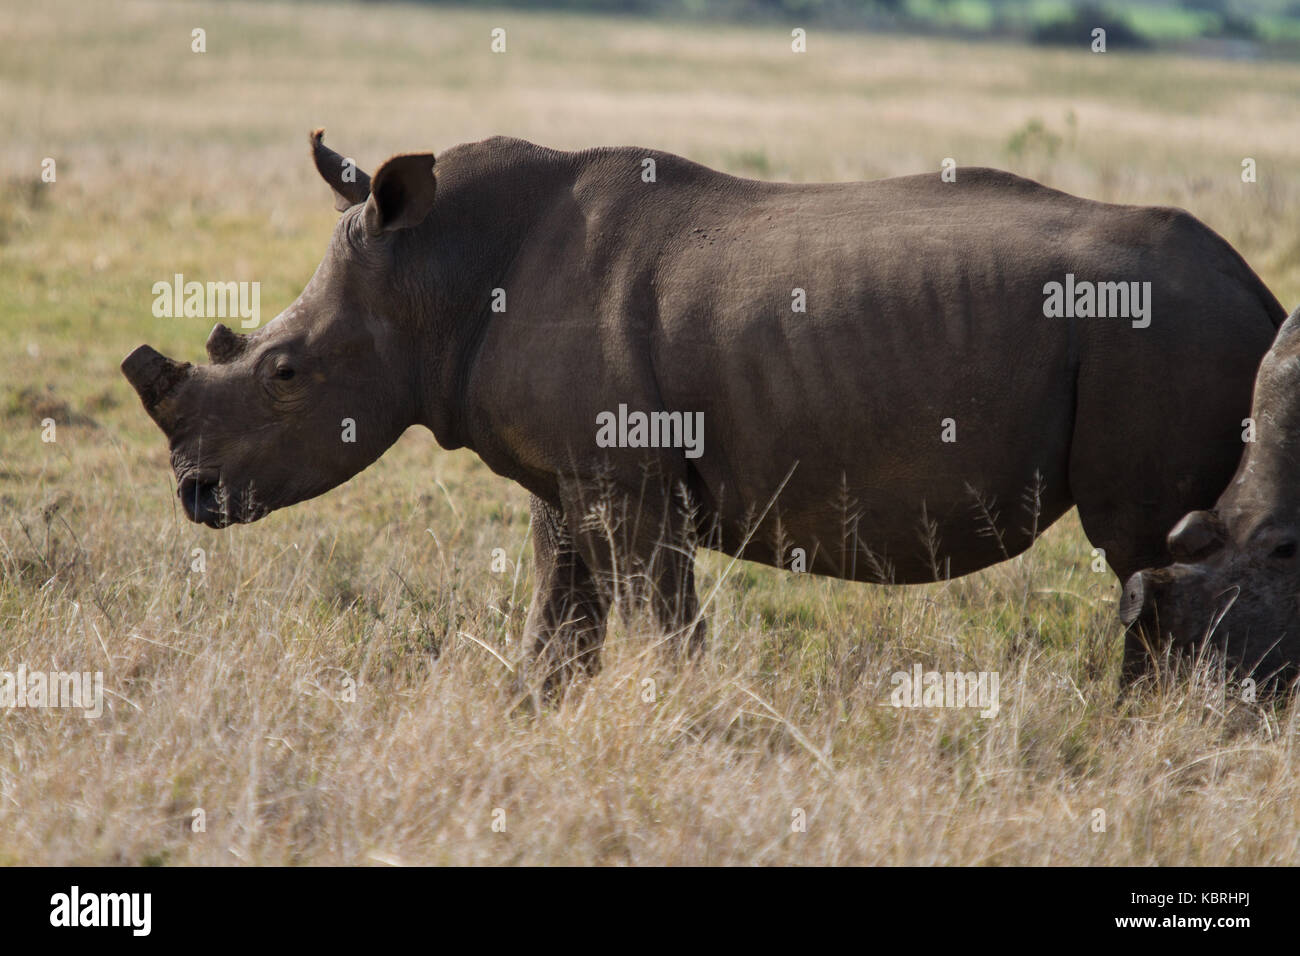 Rhinoceros at Botlierskop Private Game Reserve in South Africa, with horn removed to protect it against poachers. Stock Photo